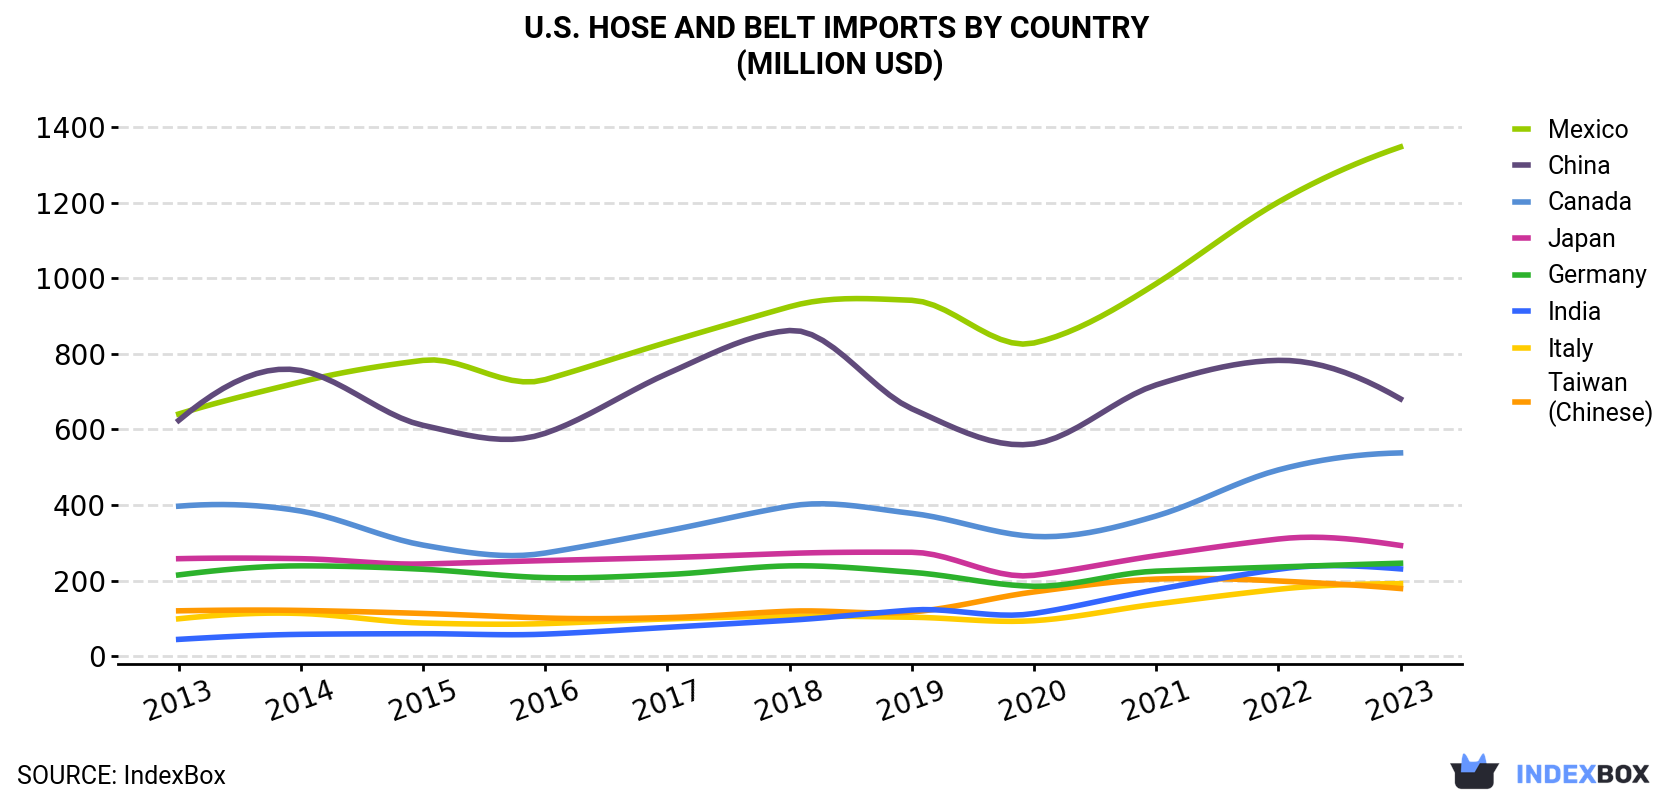 U.S. Hose And Belt Imports By Country (Million USD)